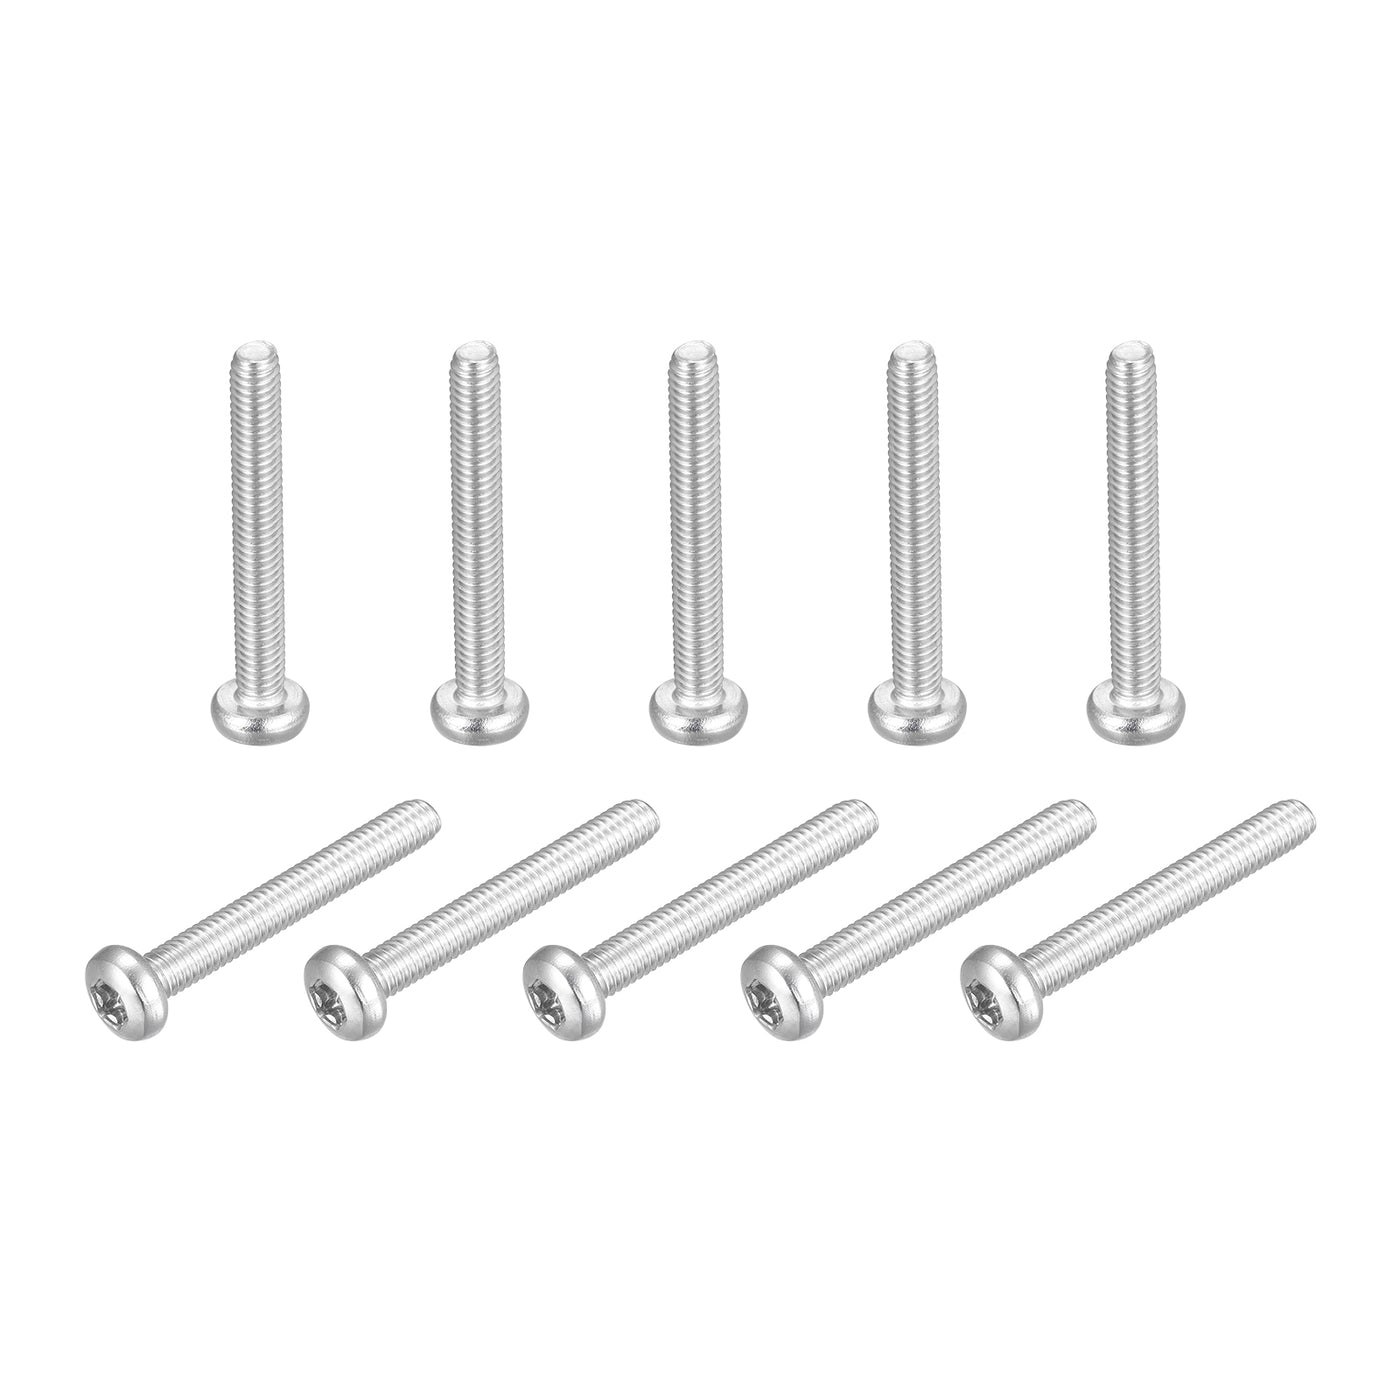 uxcell Uxcell M4x35mm Torx Security Machine Screws, 20pcs 316 Stainless Steel Pan Head Screw